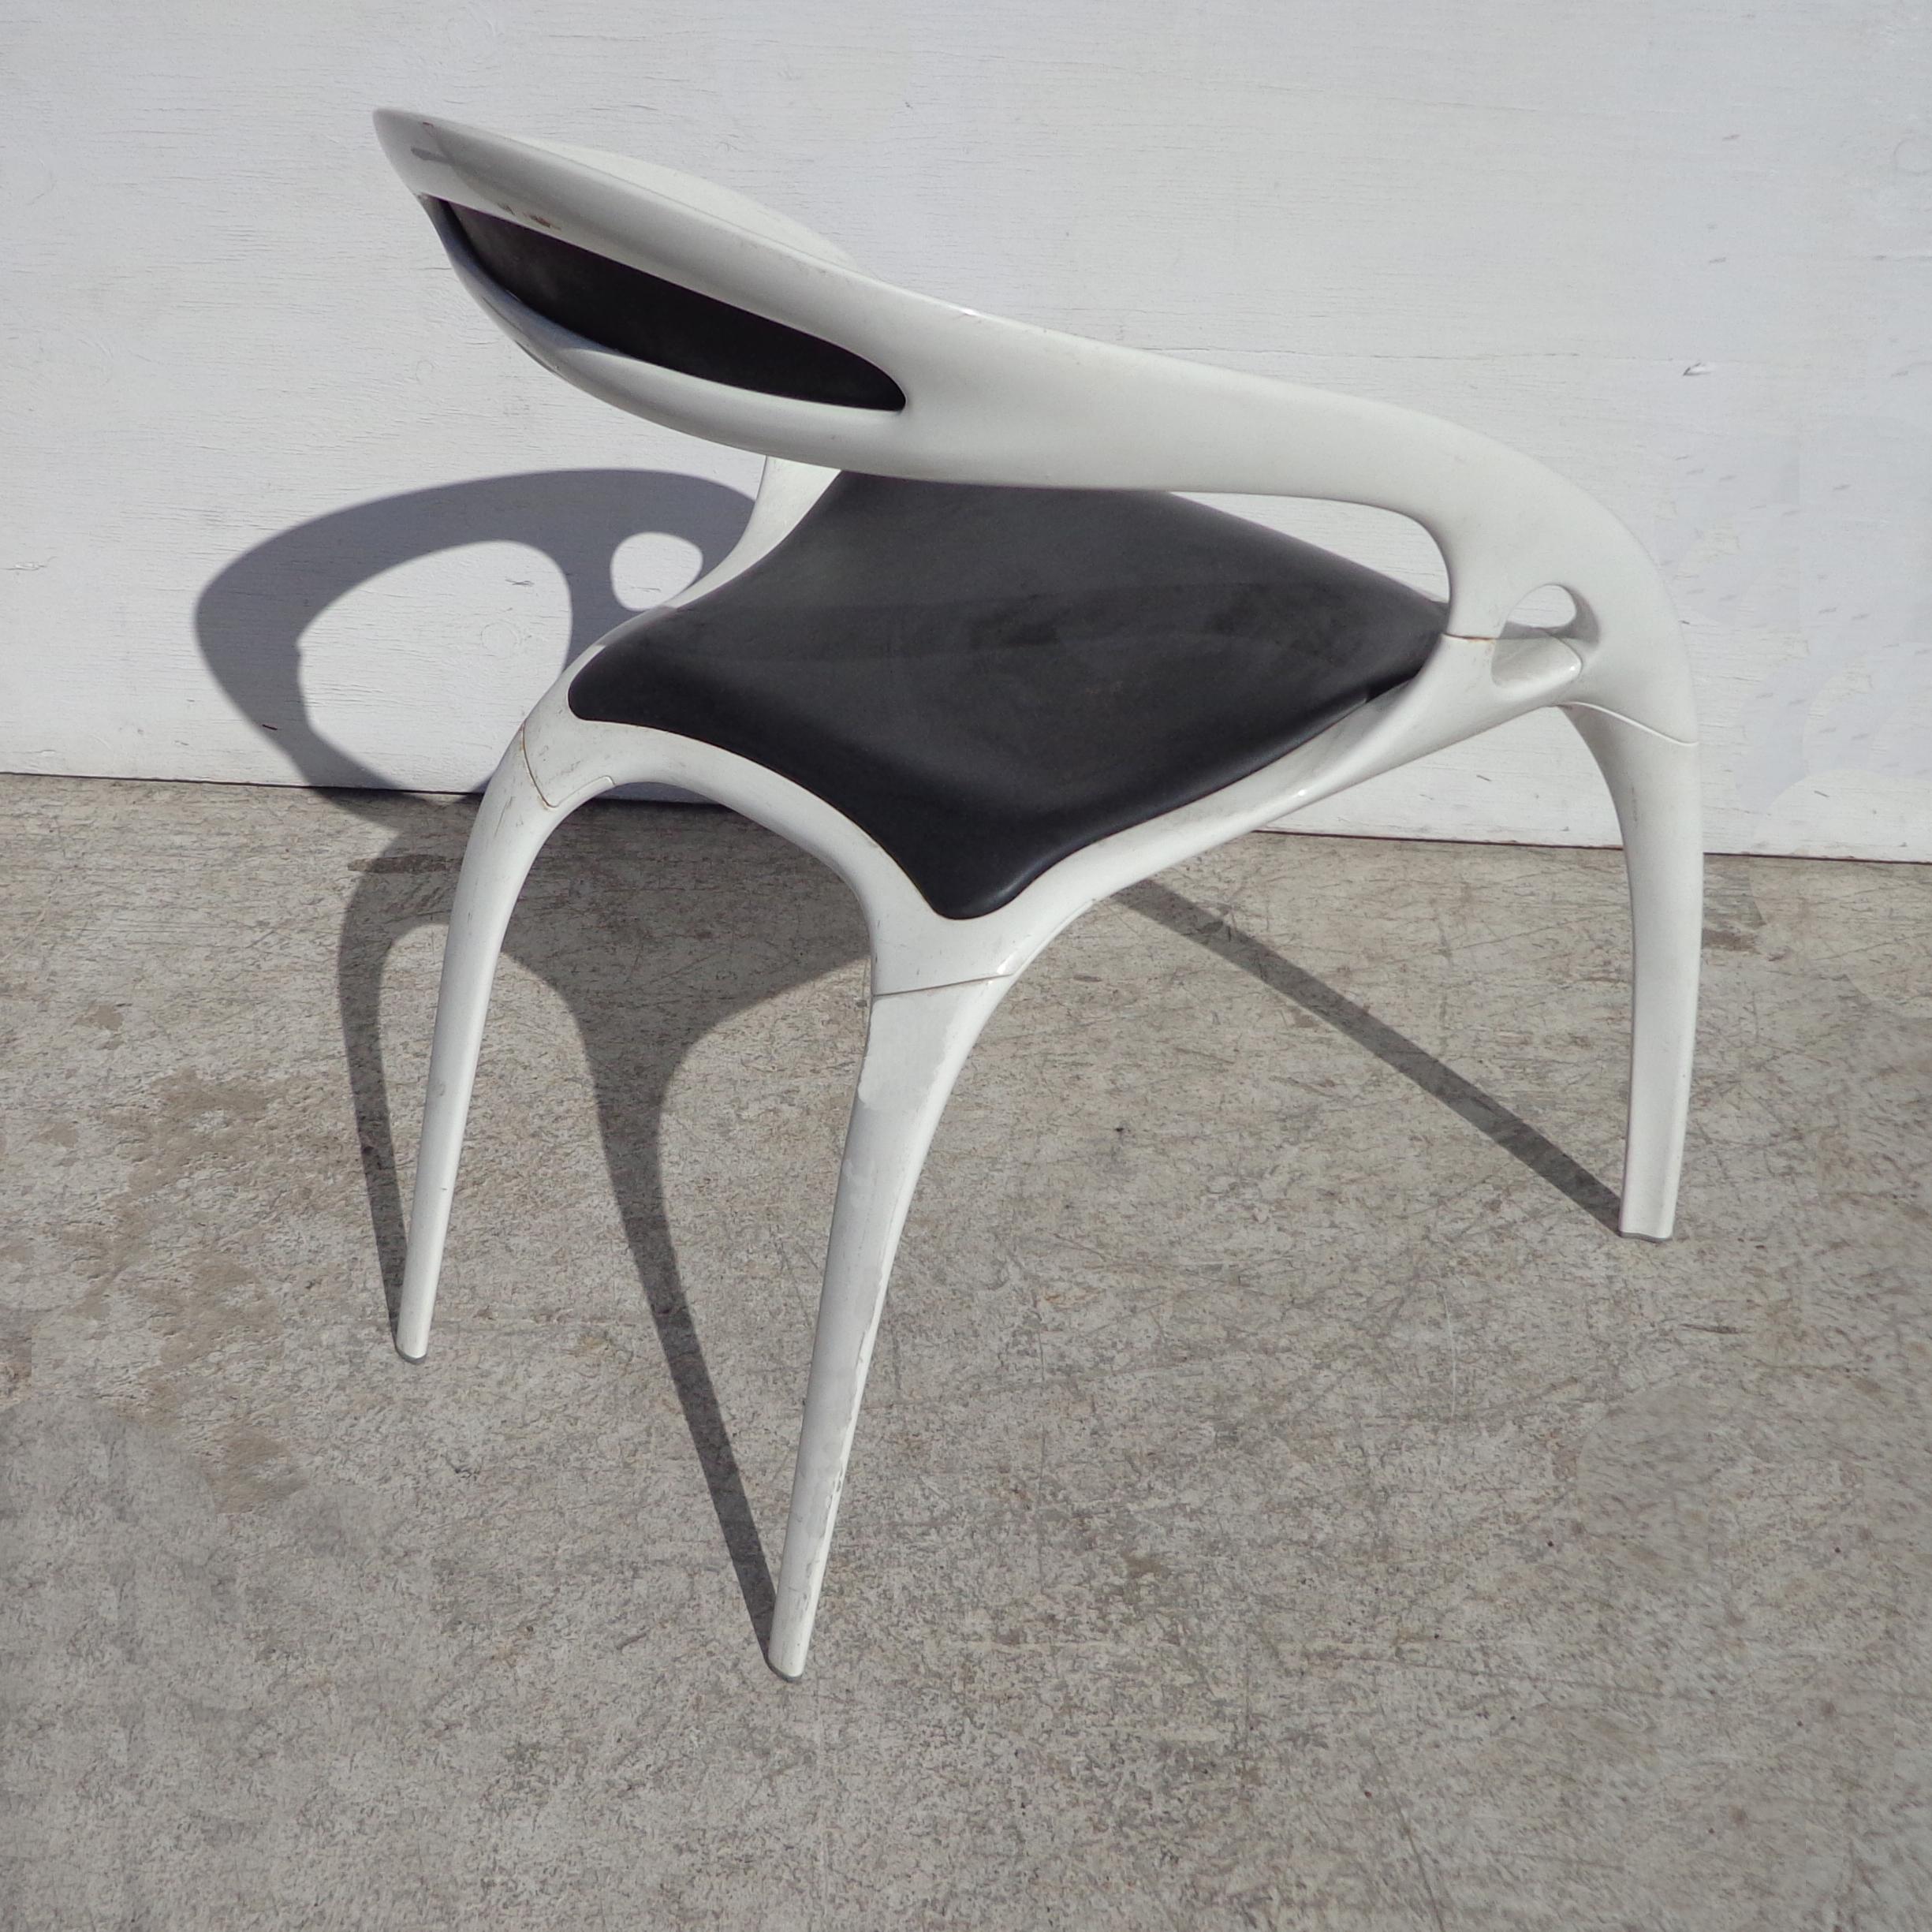 Go Chair by Ross Lovegrove by Bernhardt Furniture 

The magnesium powder coated frame and contour seat makes the Go chair unique and quite comfortable. Priced individually.

Measures: Width: 22.5